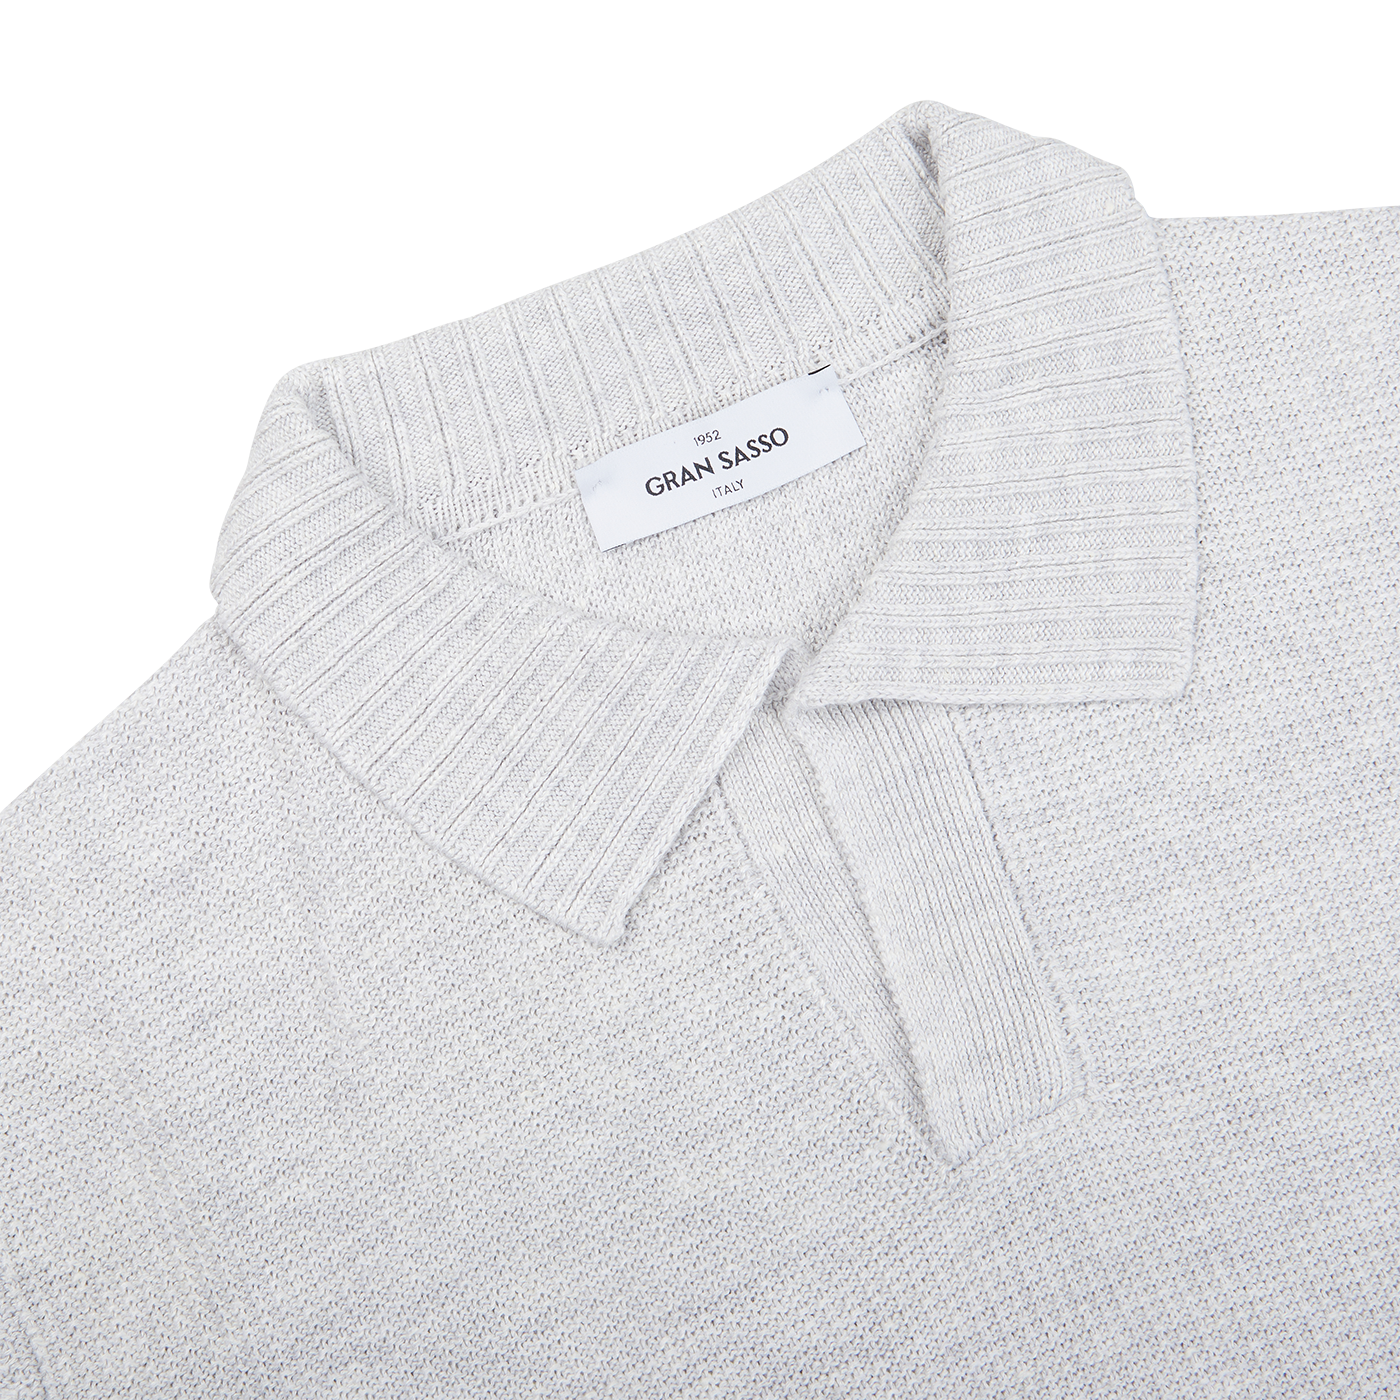 A light grey cotton linen polo shirt from Gran Sasso, perfect for summer.